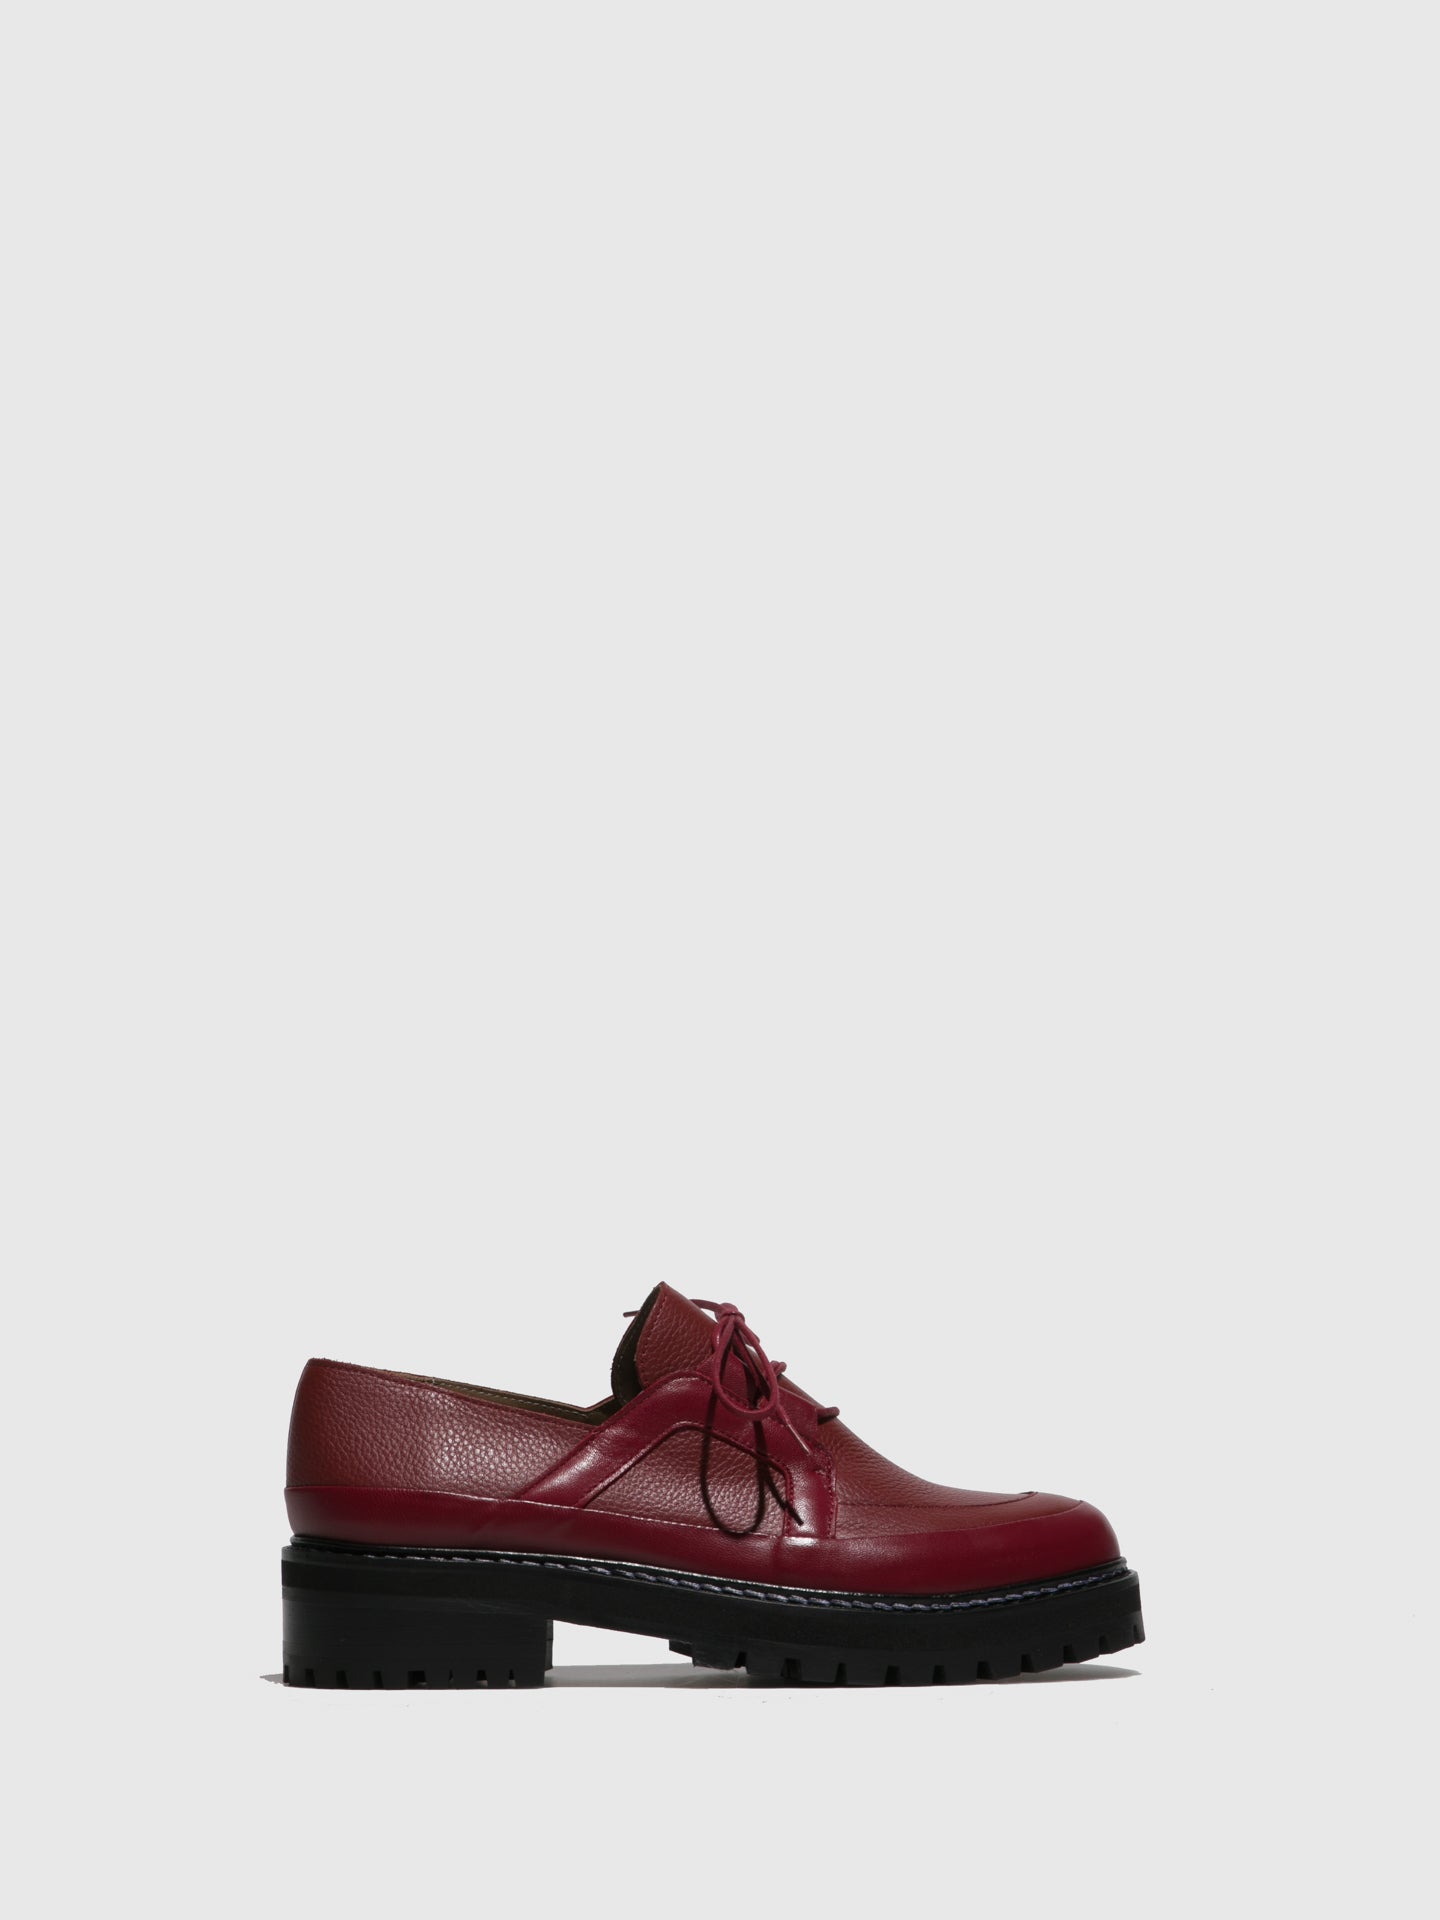 JJ Heitor Red Lace-up Loafers